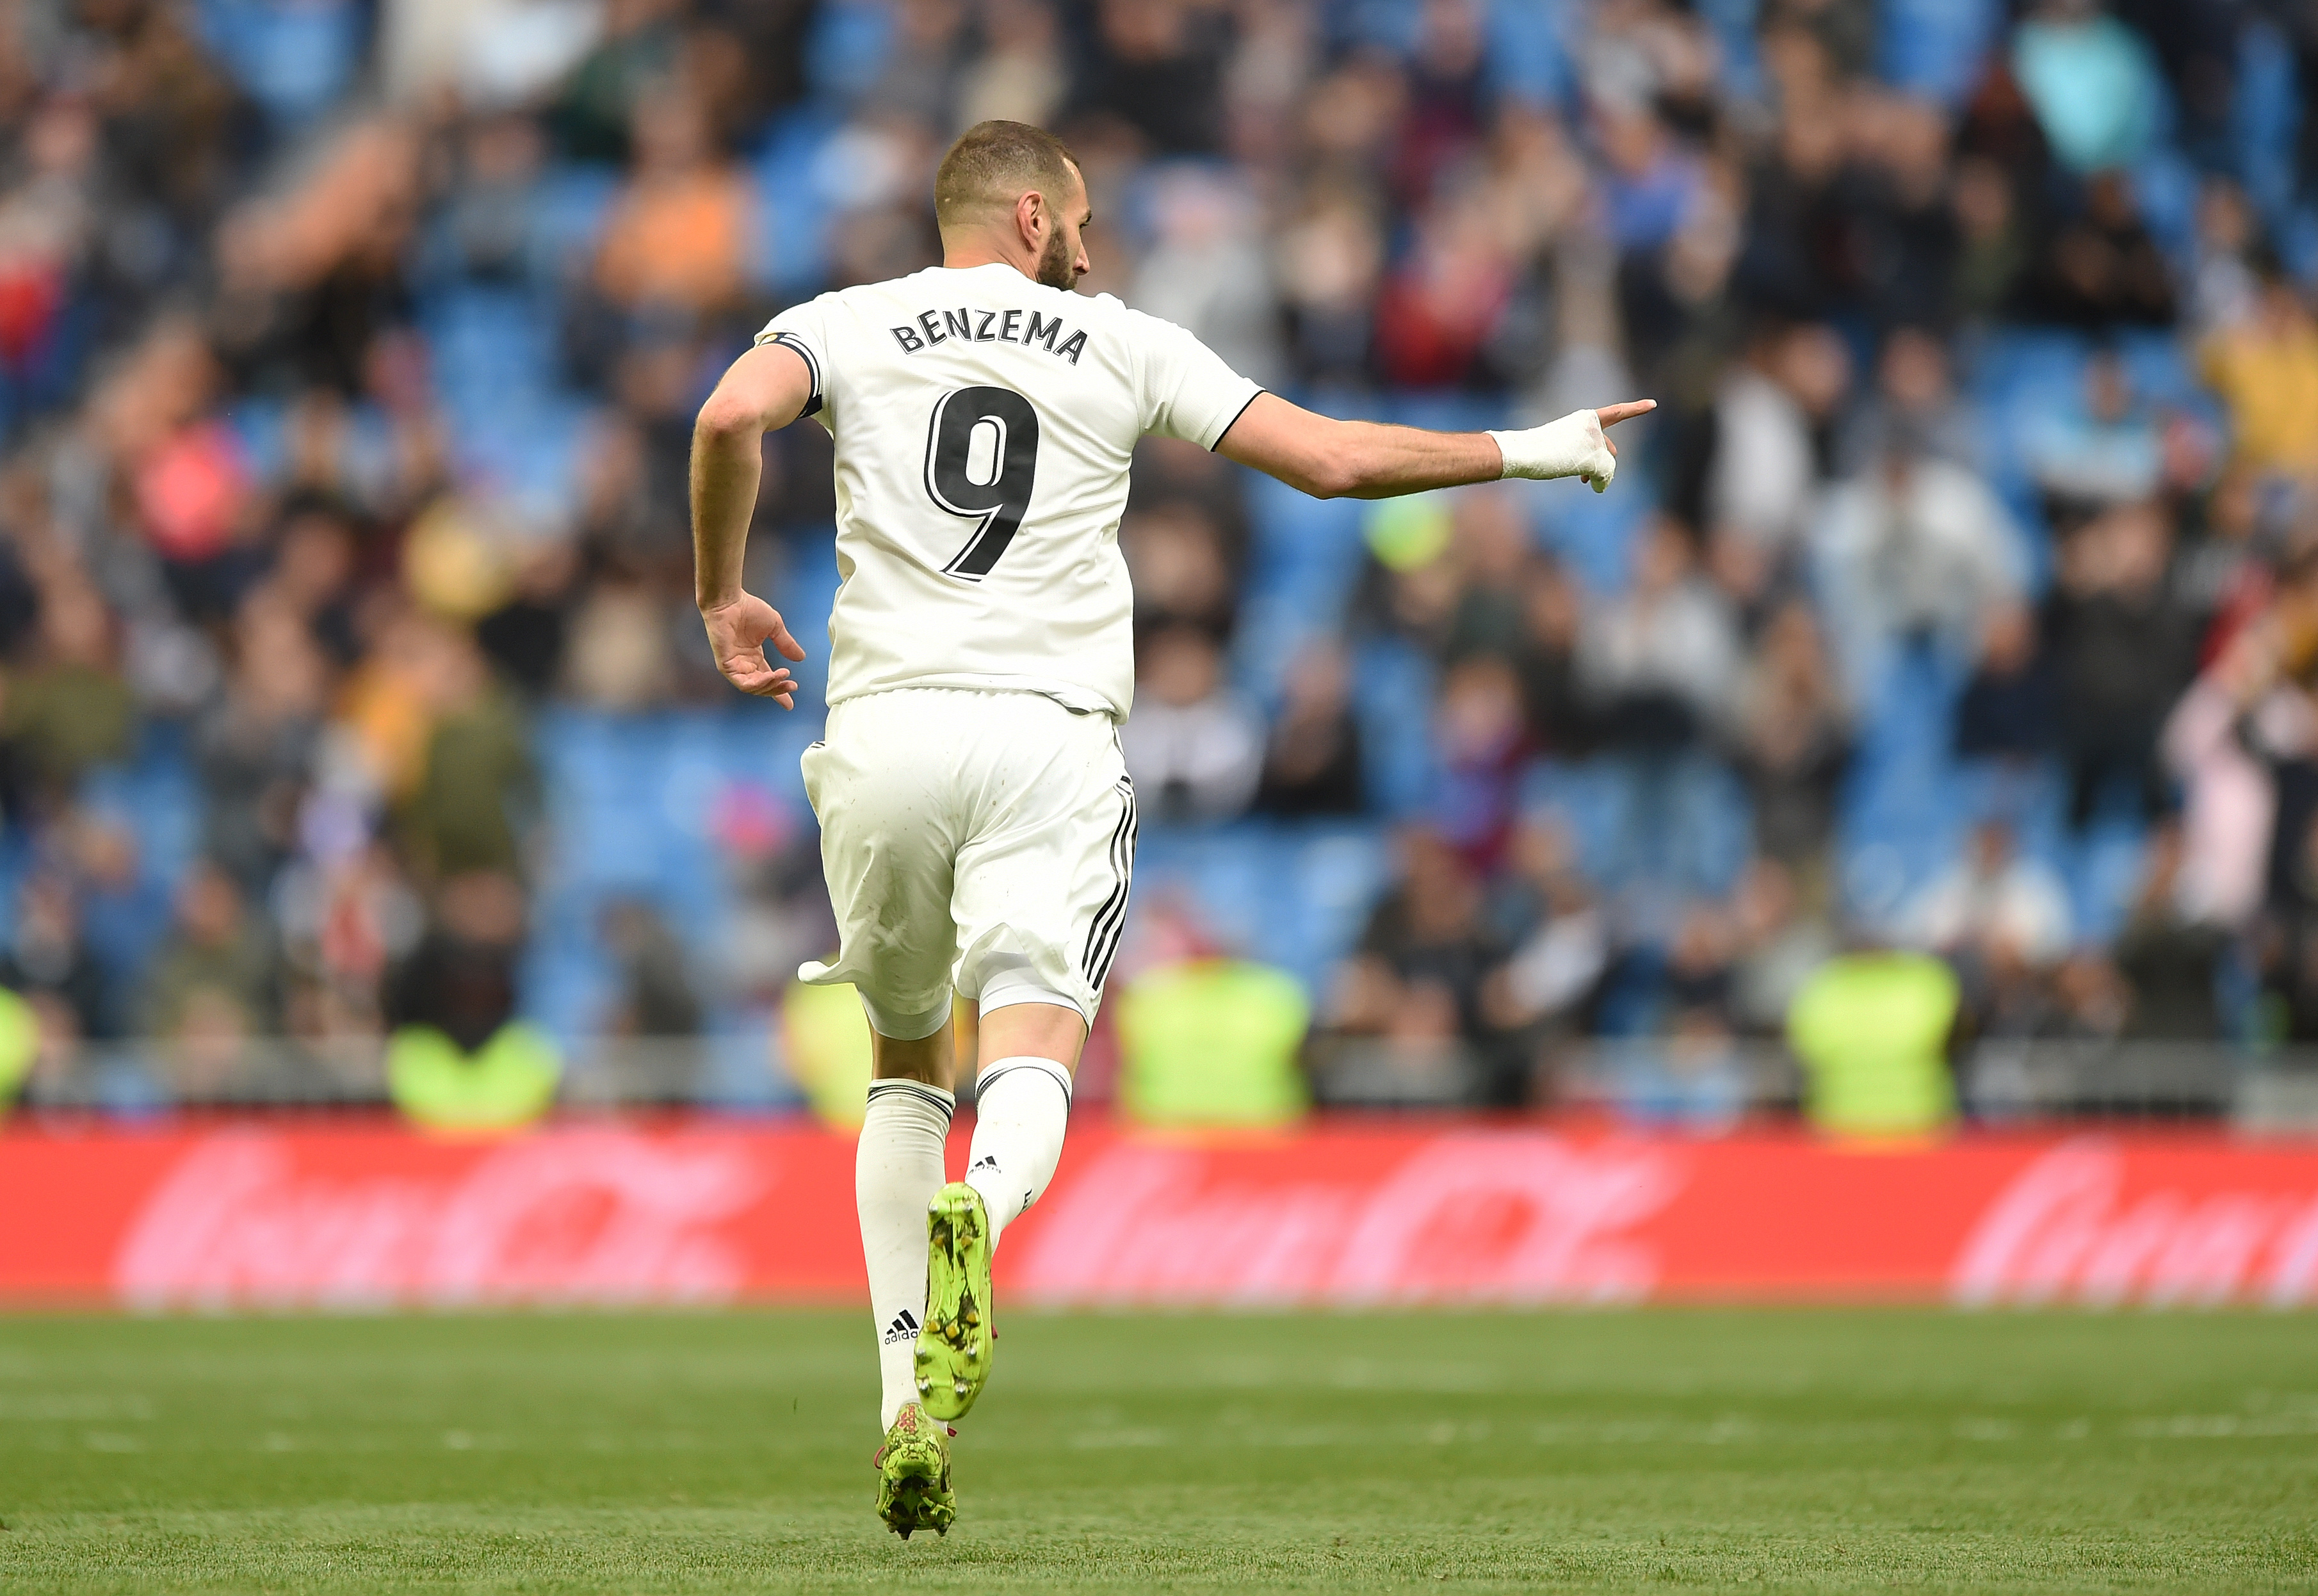 Is Benzema set to see his role reduced? (Photo by Denis Doyle/Getty Images)